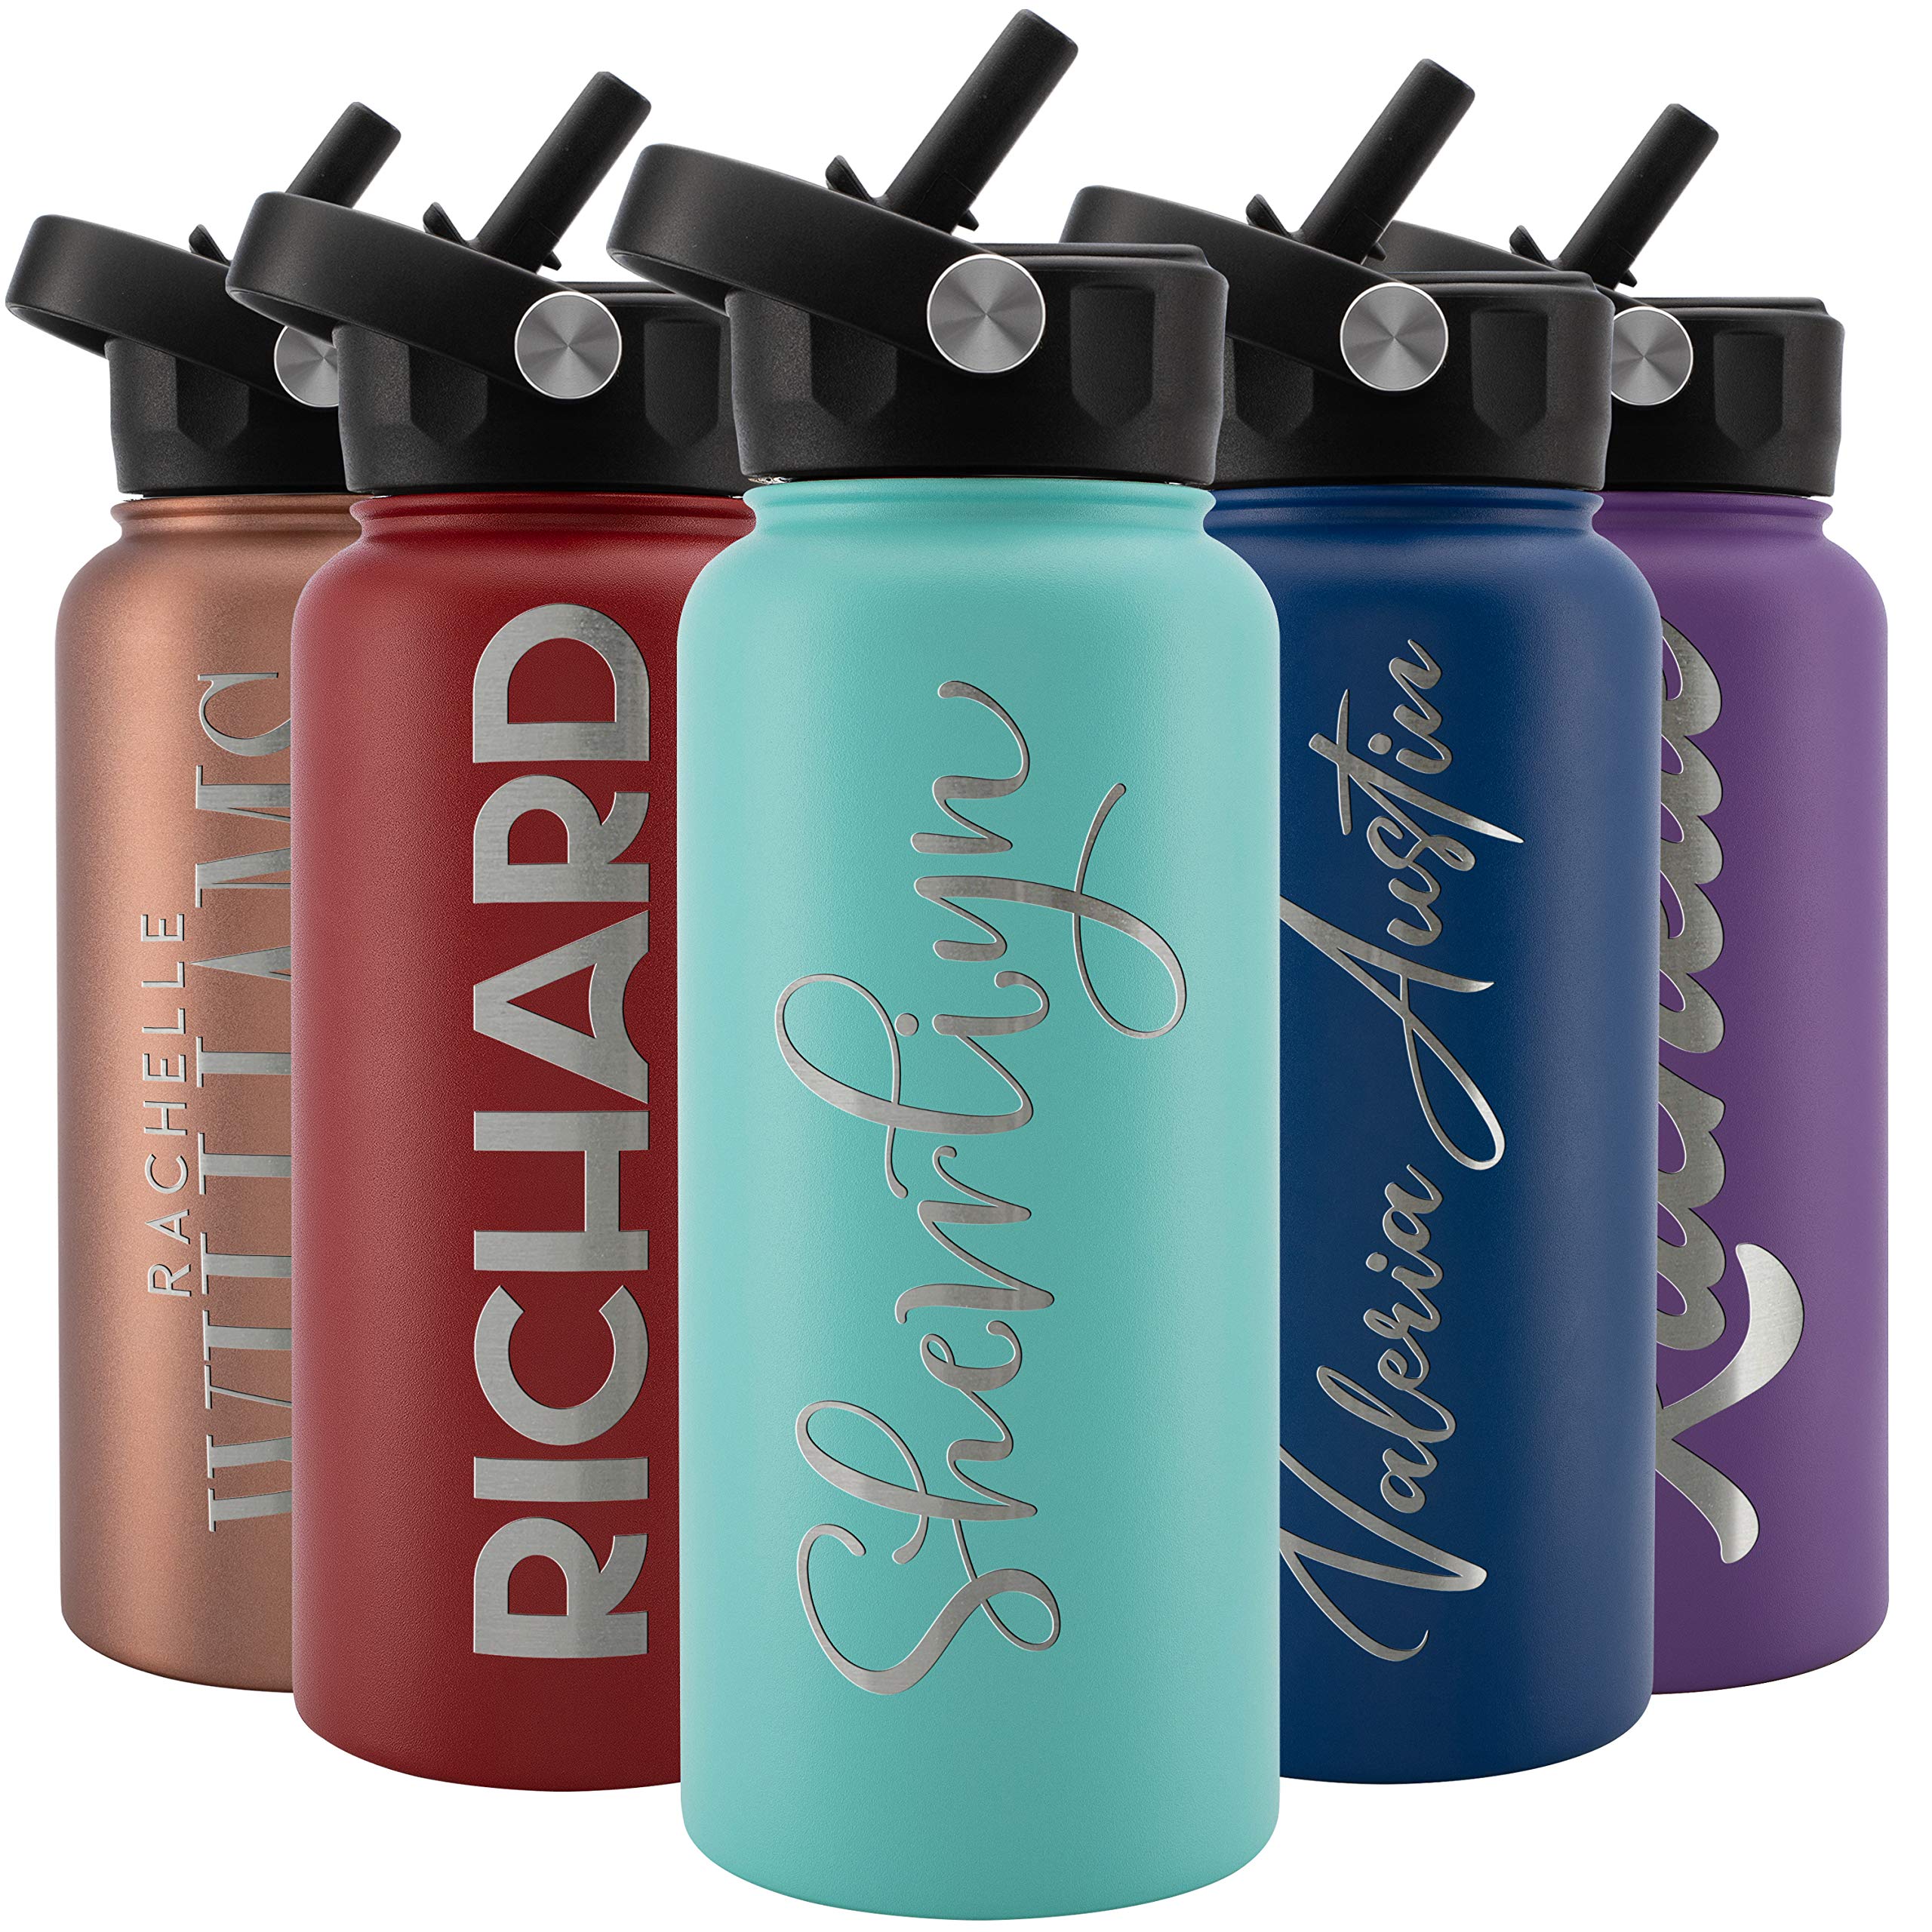 How to Personalize Stainless Steel Water Bottle